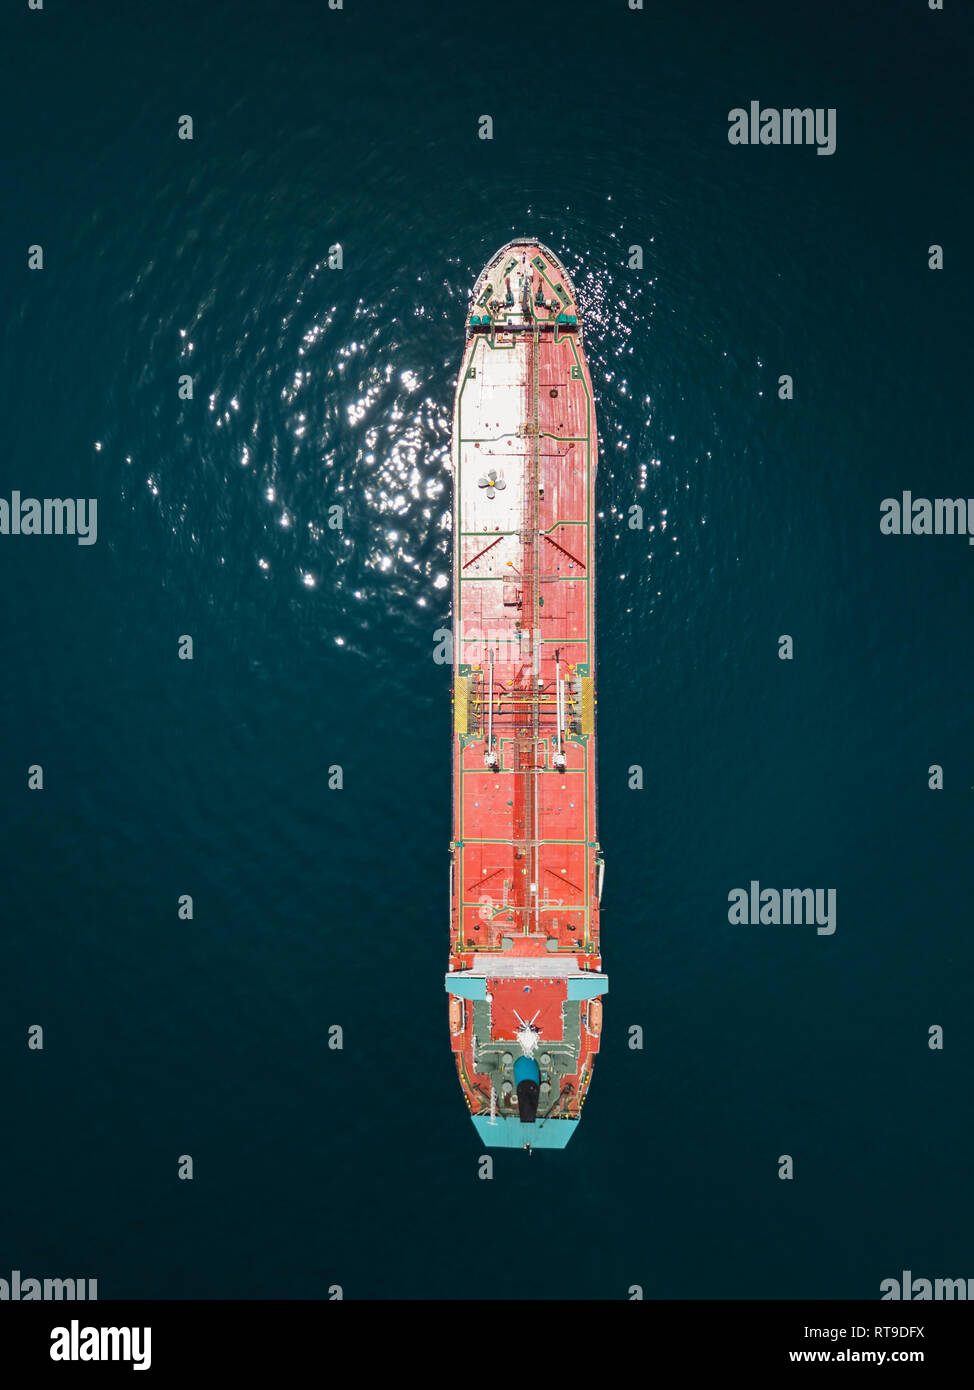 Indonesia, Bali, Aerial view of oil tanker Stock Photo